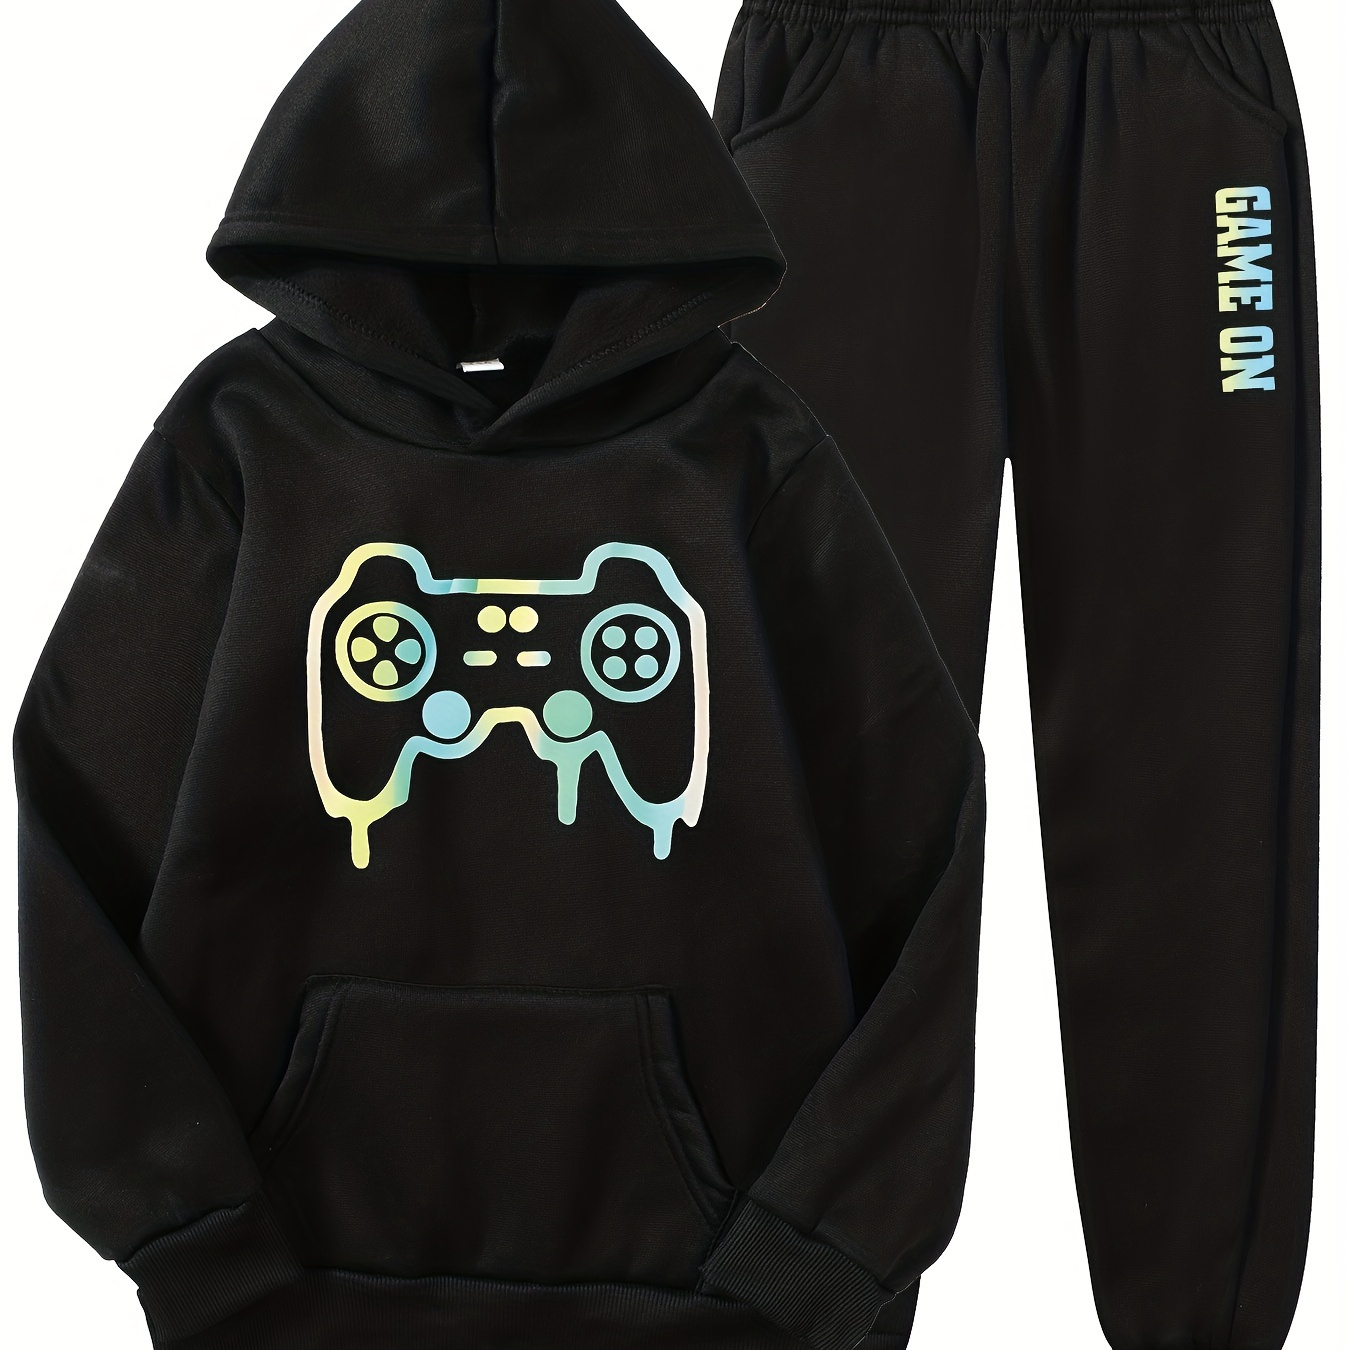 

2 Pieces "game On" Print Jogger Pants Gamepad Graphic Hooded Sweatshirt Long Sleeve Hoodies For Spring And Summer, Sports